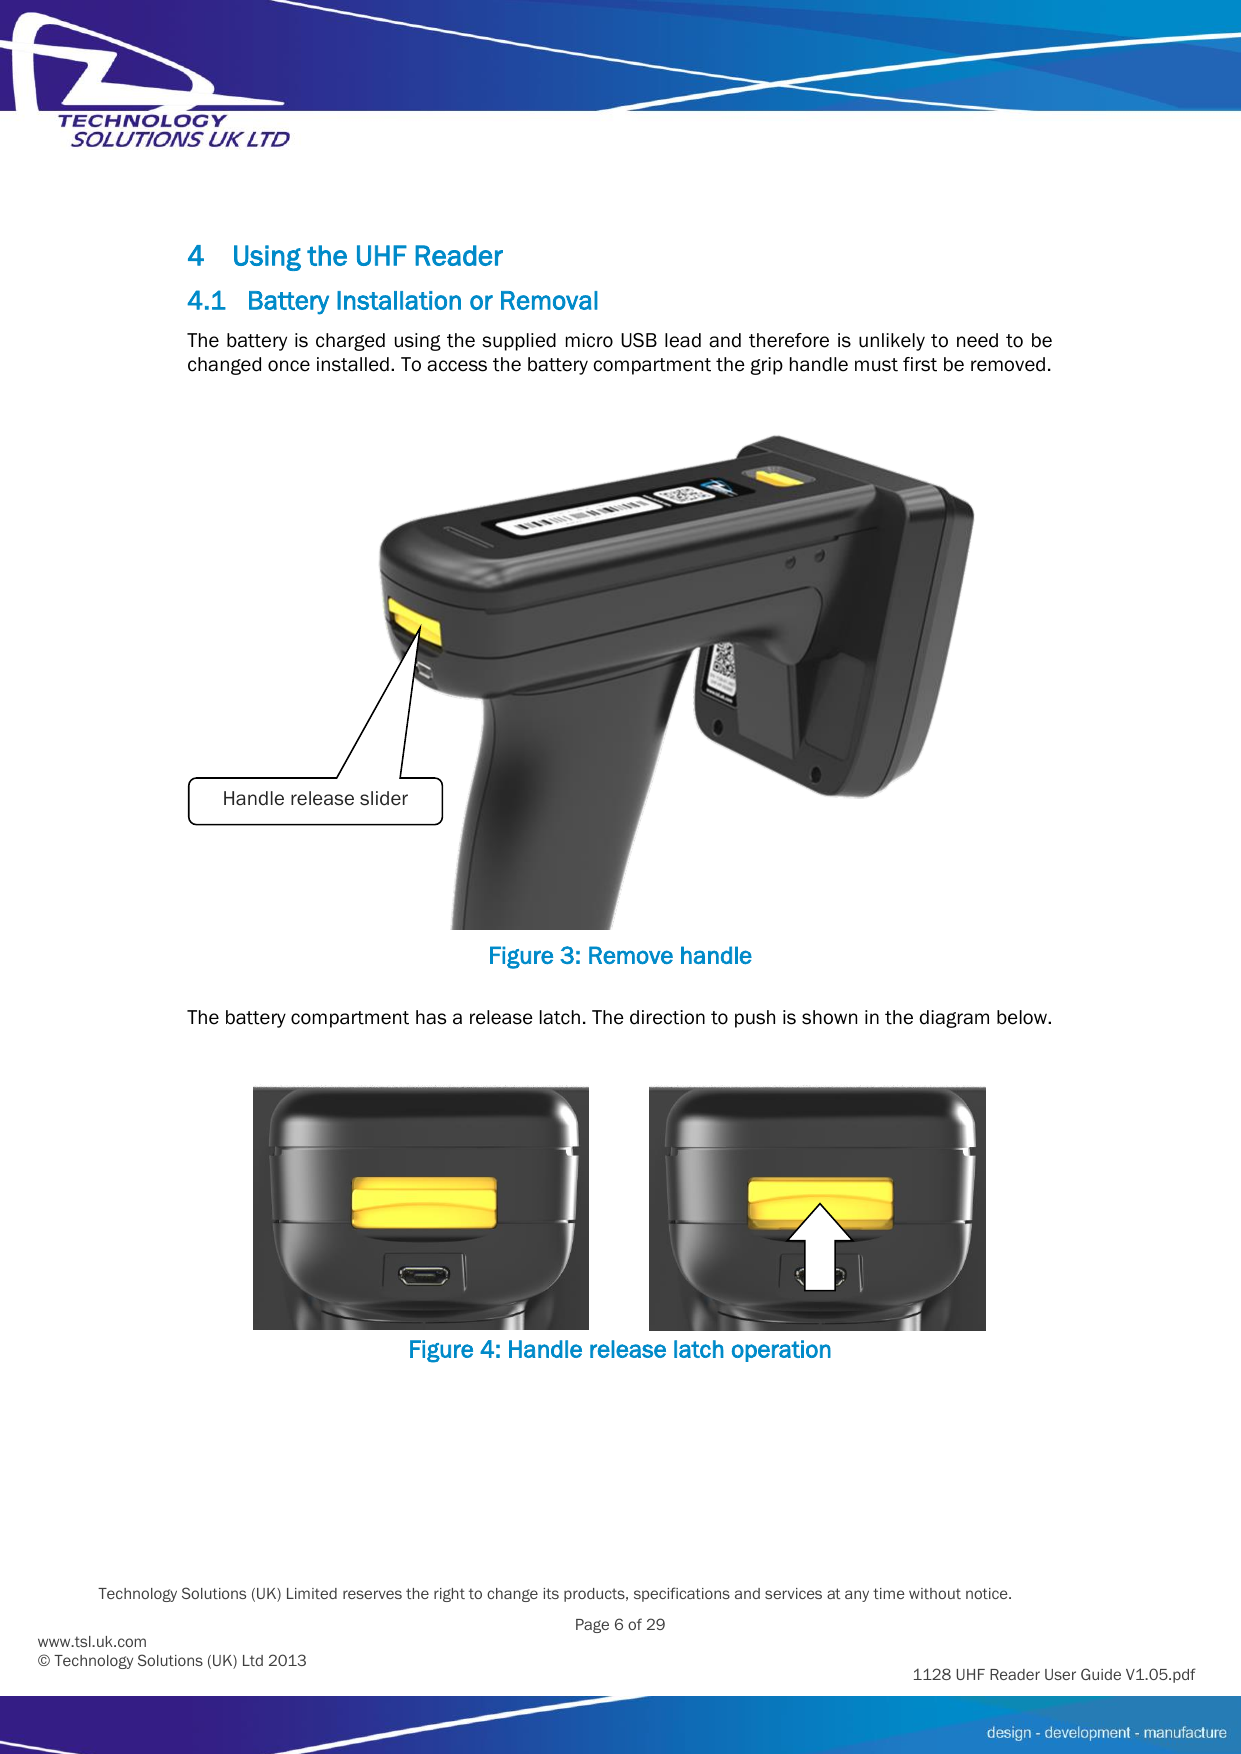          Technology Solutions (UK) Limited reserves the right to change its products, specifications and services at any time without notice.   Page 6 of 29 1128 UHF Reader User Guide V1.05.pdf www.tsl.uk.com © Technology Solutions (UK) Ltd 2013  4 Using the UHF Reader 4.1 Battery Installation or Removal The battery is charged using the supplied micro USB lead and therefore is unlikely to need to be changed once installed. To access the battery compartment the grip handle must first be removed.  Figure 3: Remove handle  The battery compartment has a release latch. The direction to push is shown in the diagram below.    Figure 4: Handle release latch operation Handle release slider 